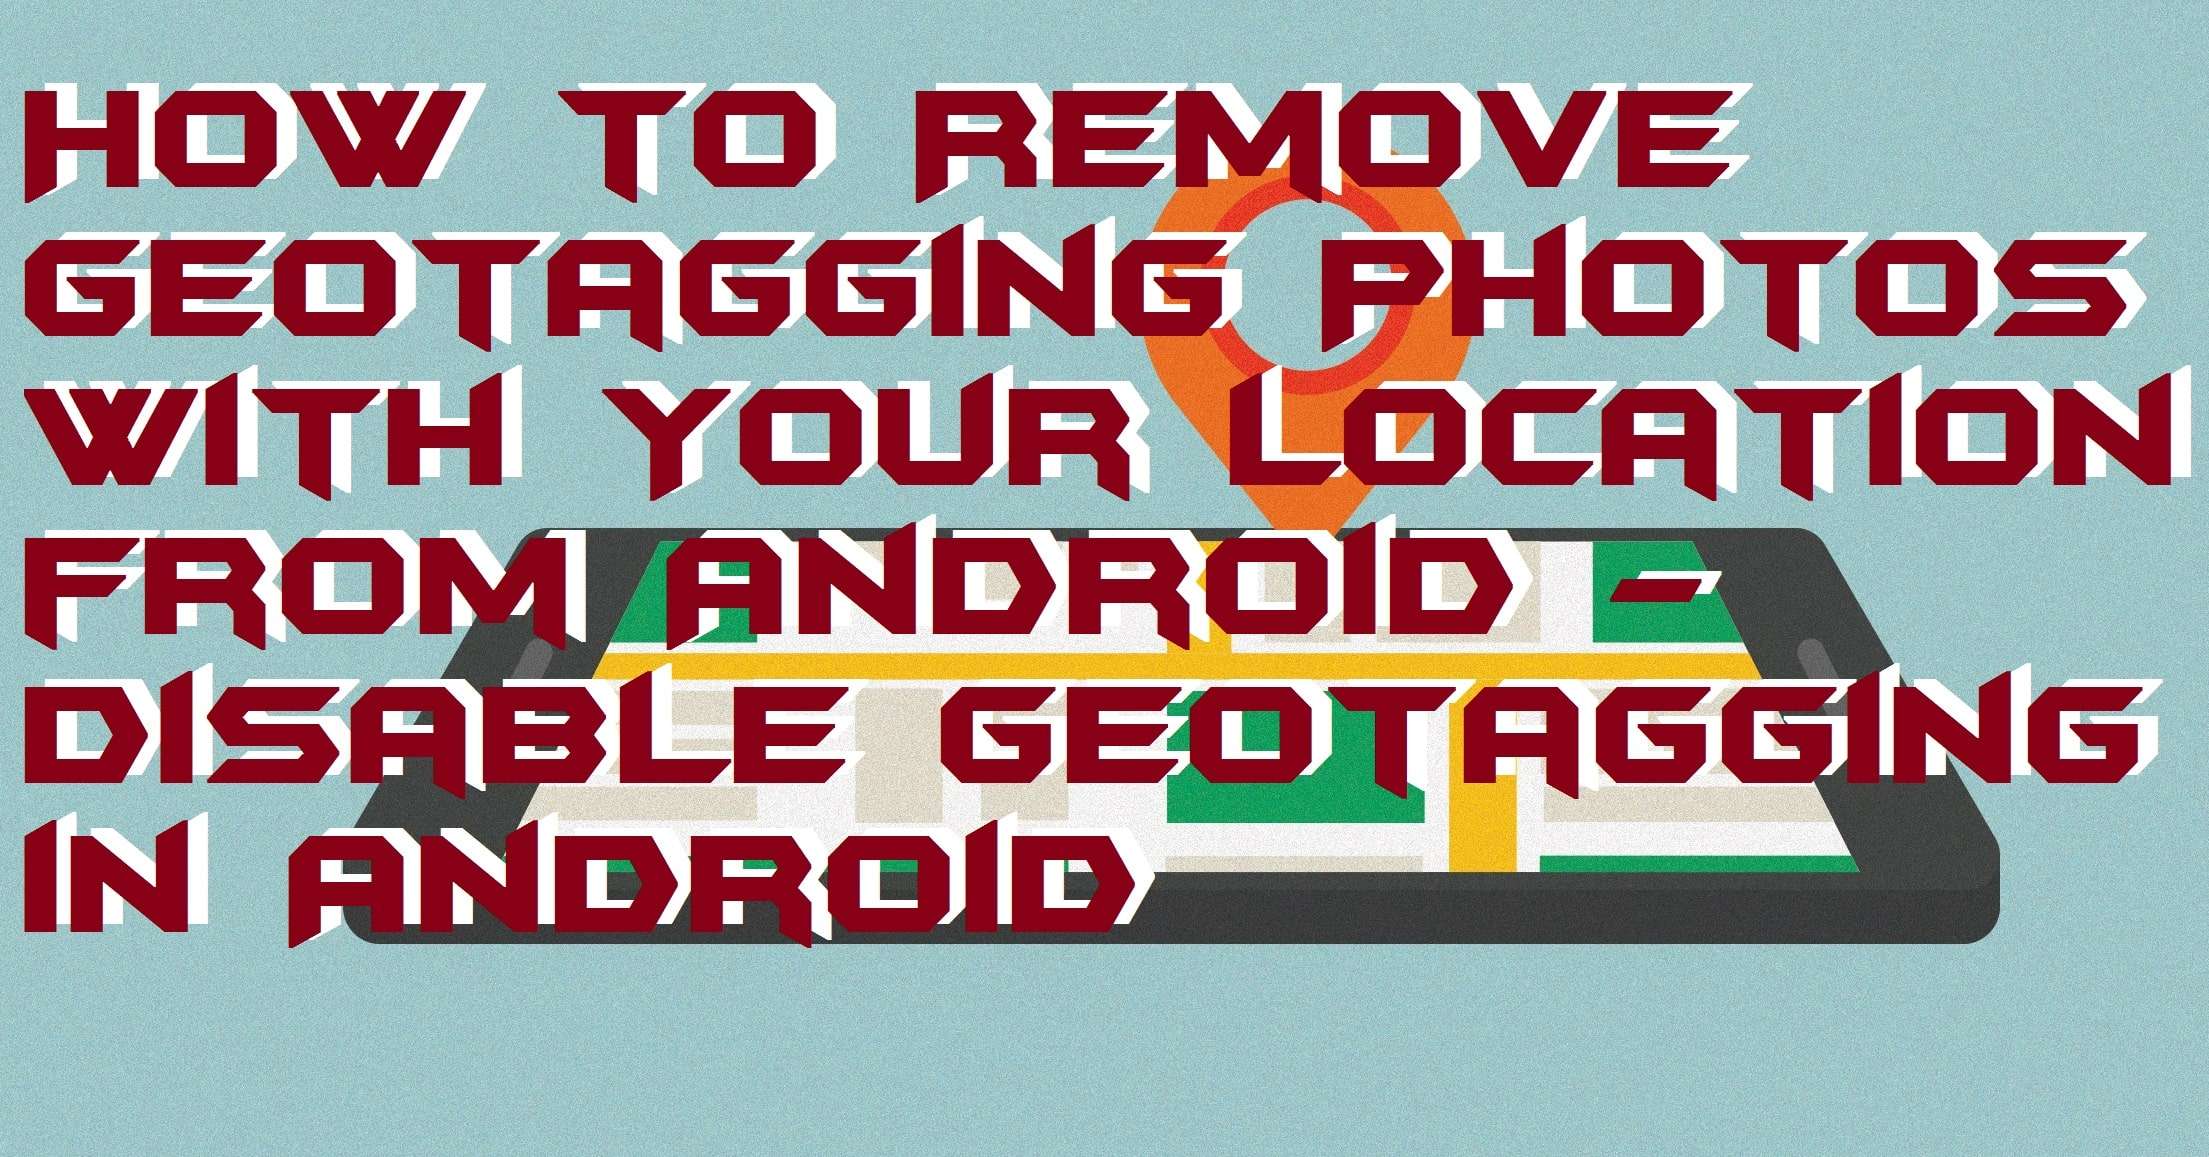 How to Remove Geotagging Photos with Your Location from Android - Disable Geotagging in Android